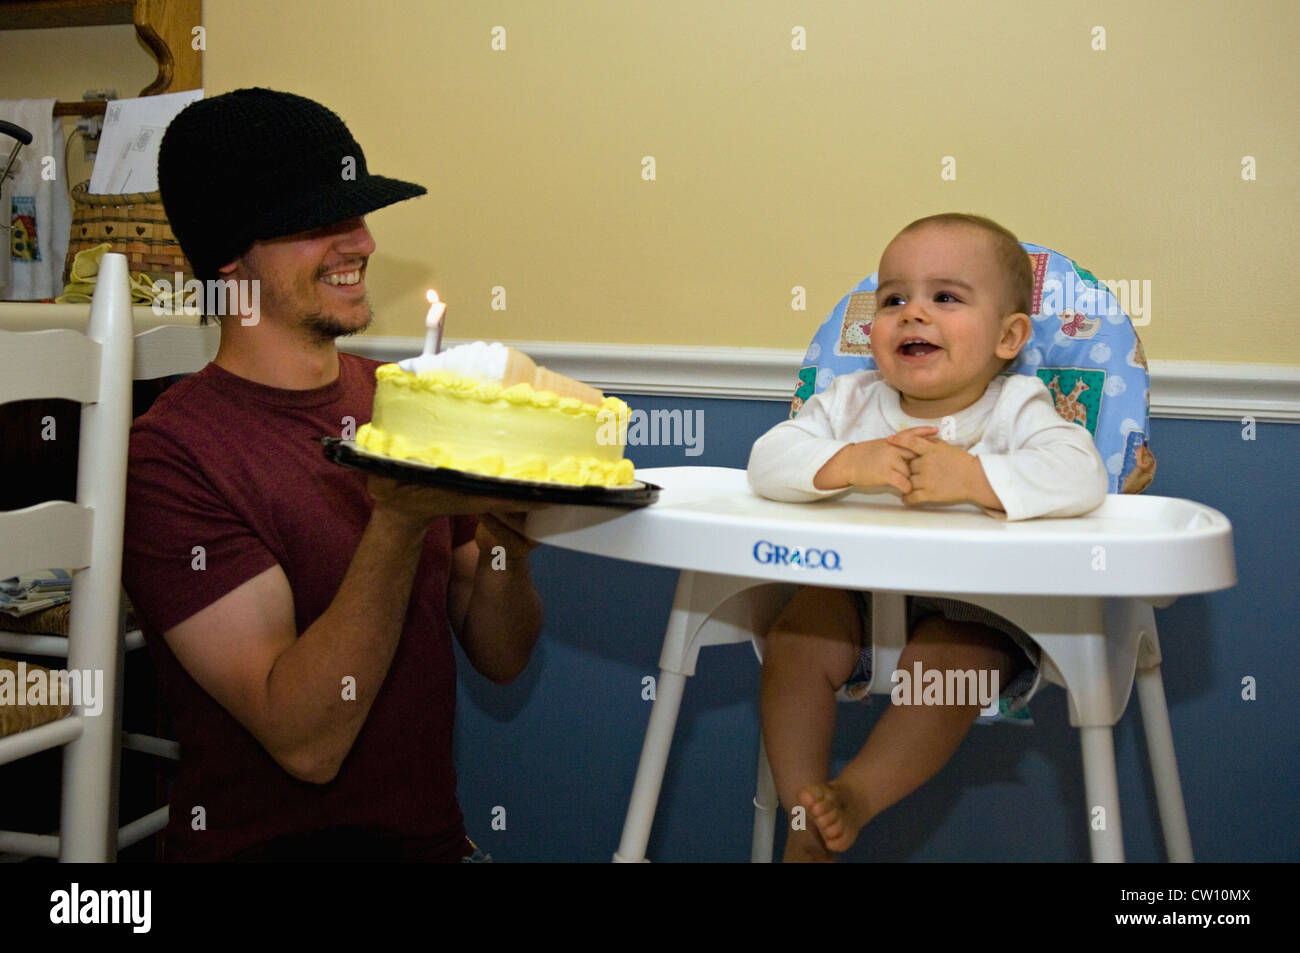 Father Holding Birthday Cake of One Year Old Baby Boy on His Birthday Stock Photo